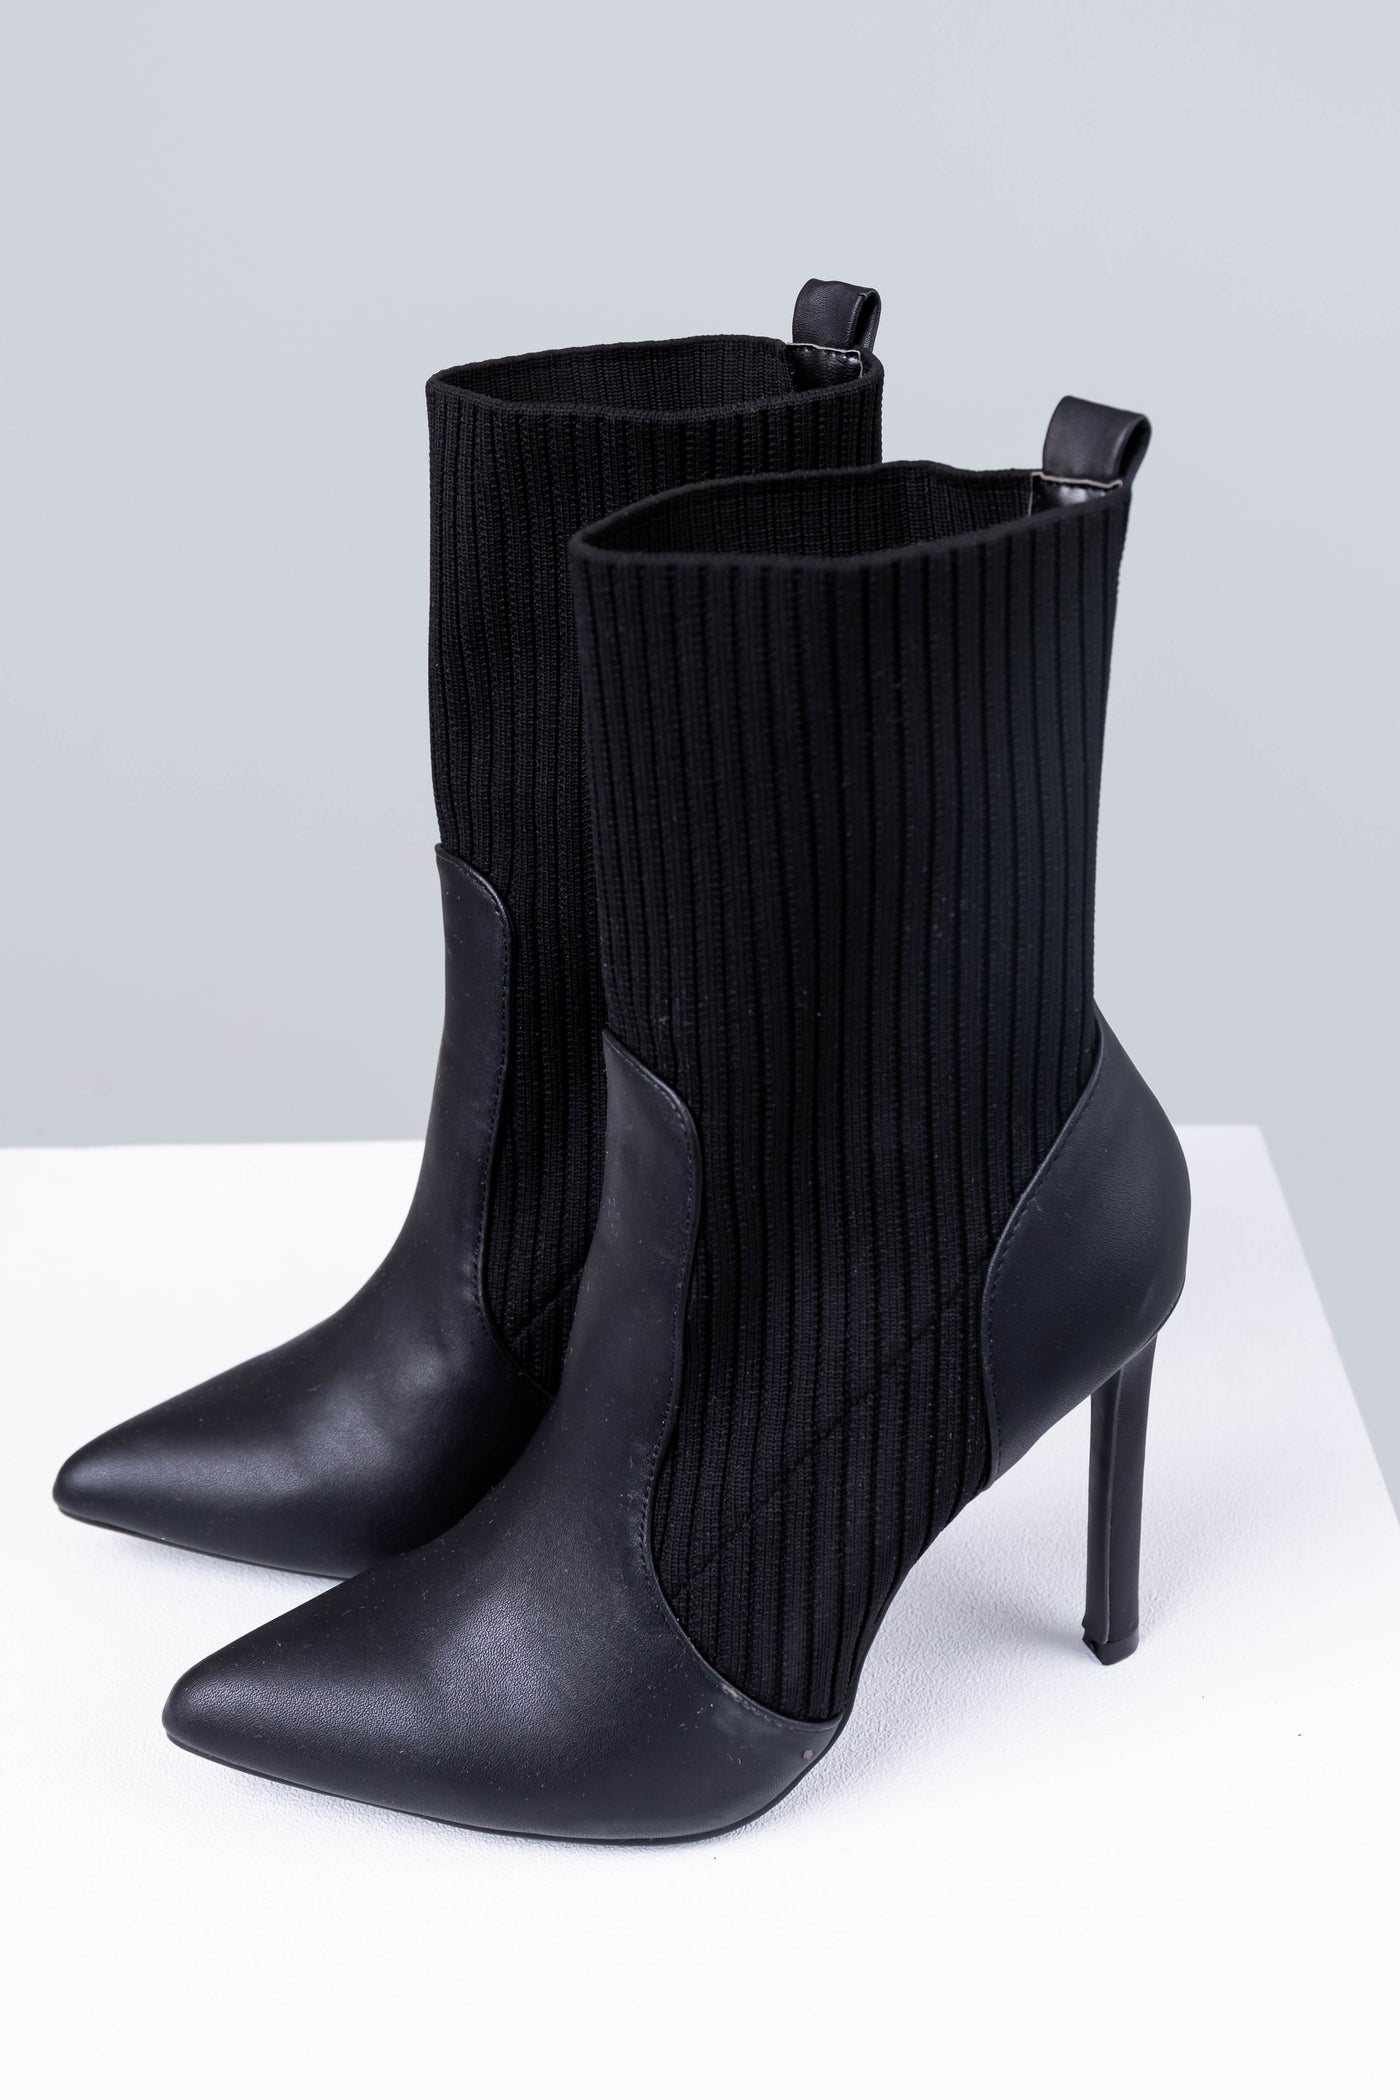 Black Ribbed Knit Pointed Toe High Heel Booties